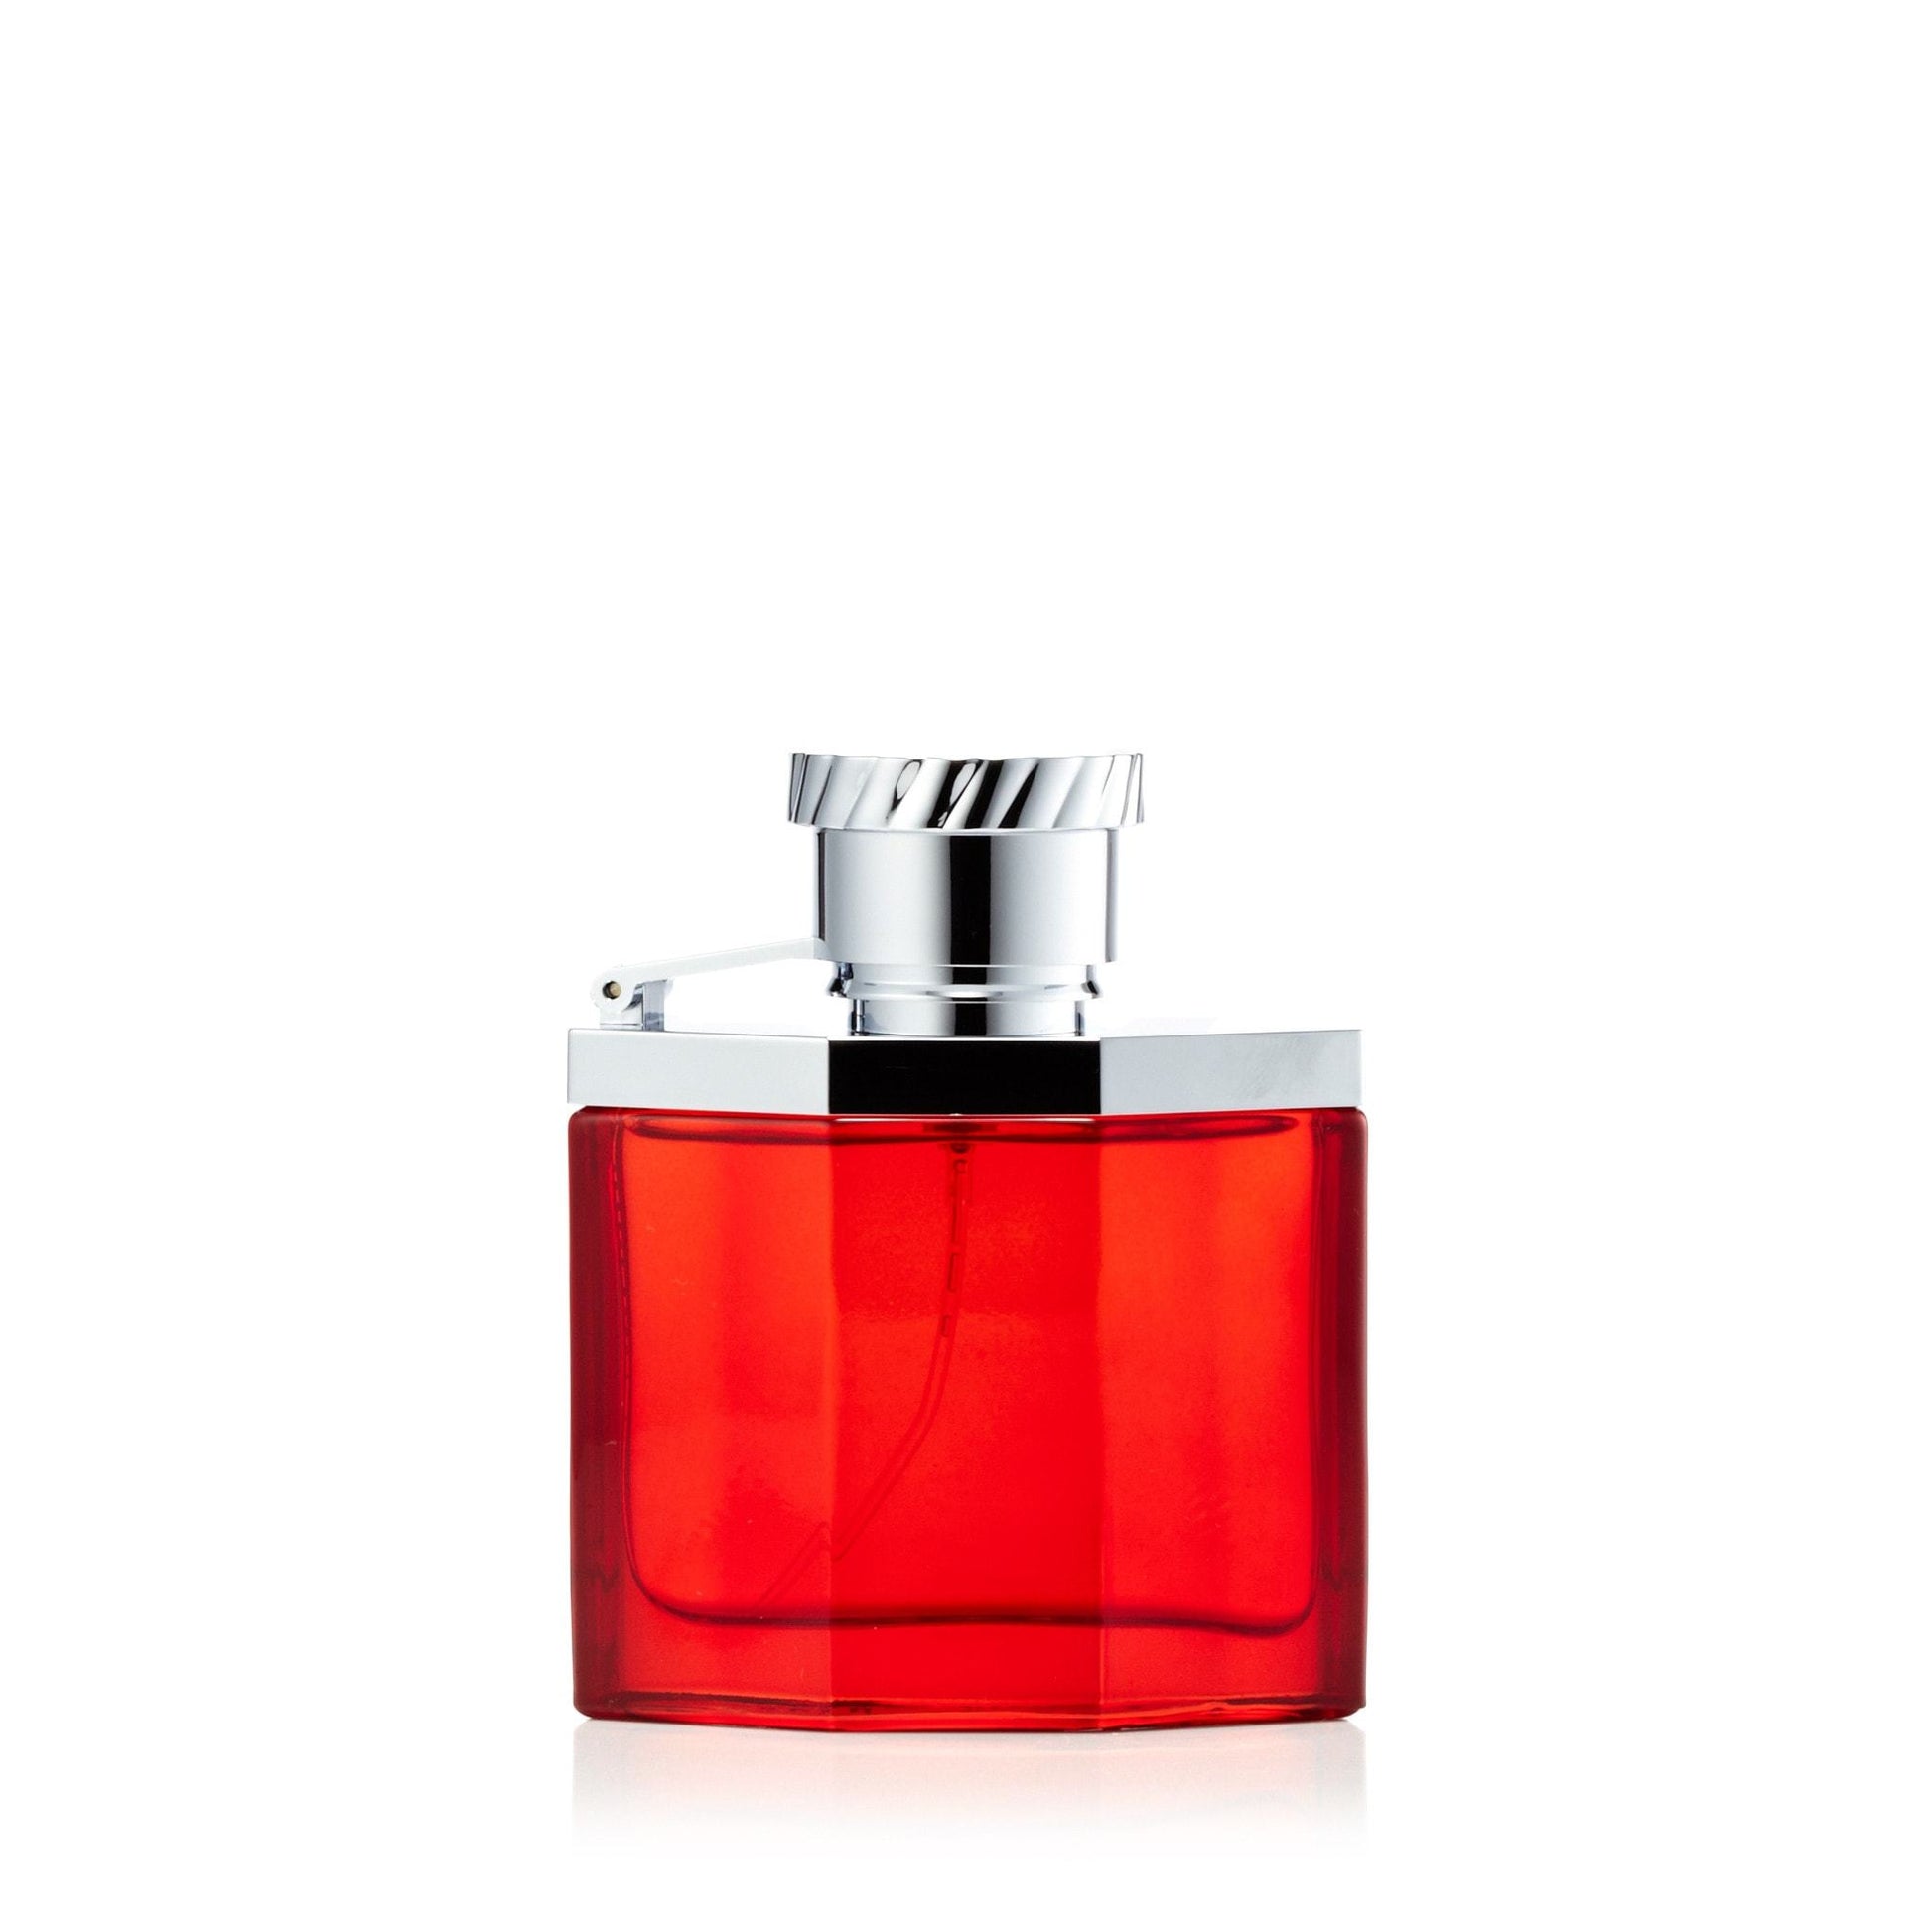 Desire Red Eau de Toilette Spray for Men by Alfred Dunhill, Product image 3